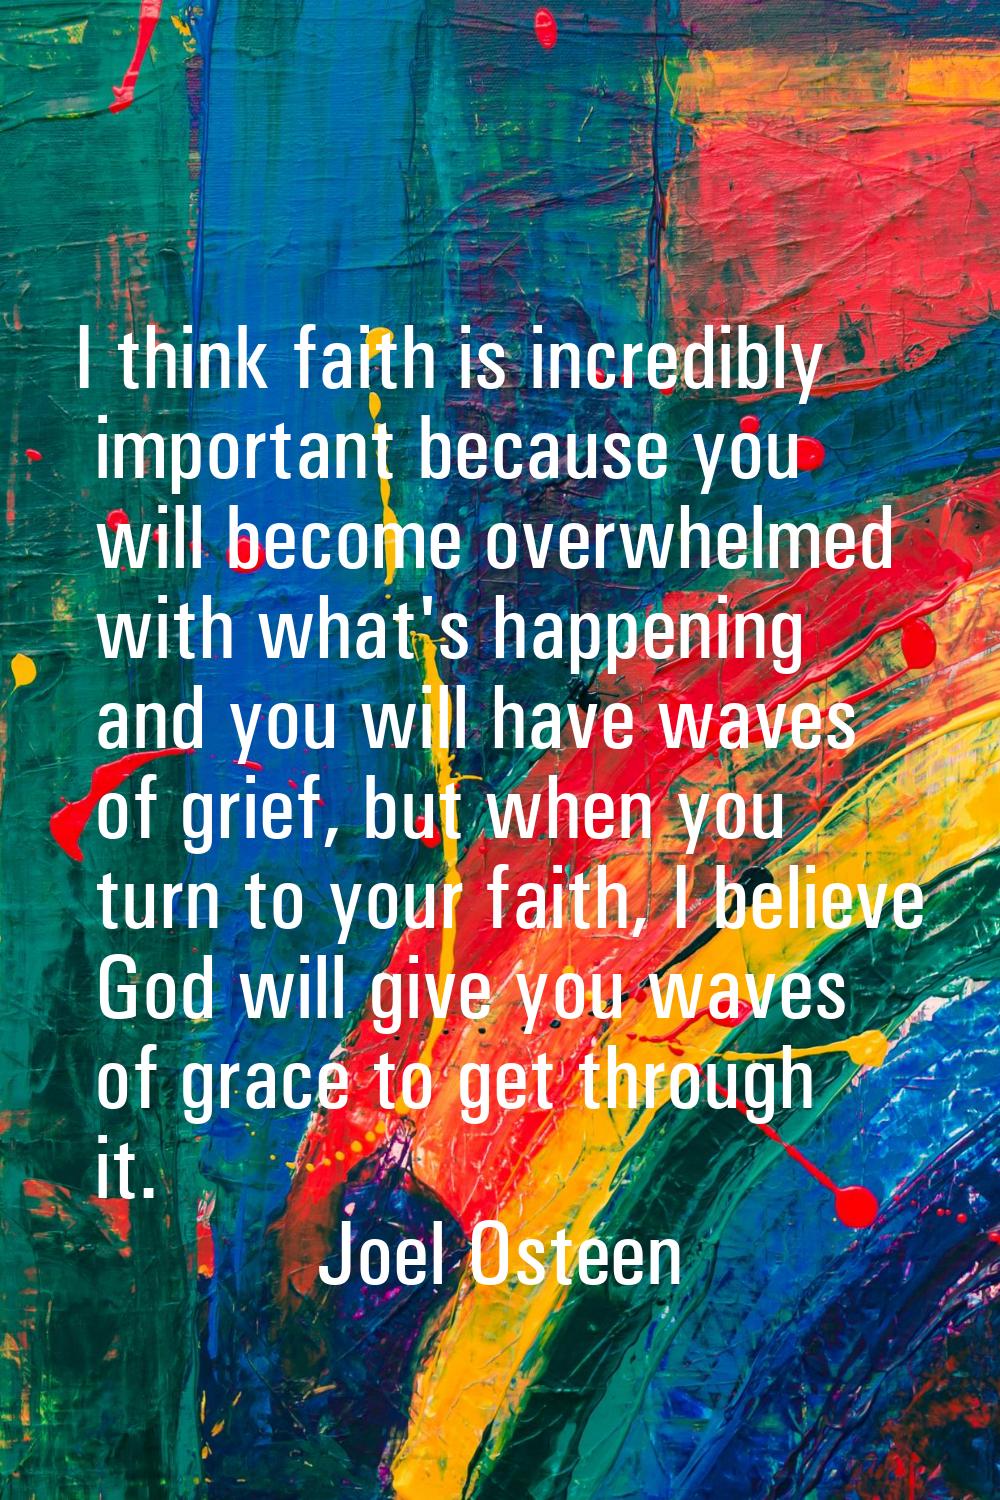 I think faith is incredibly important because you will become overwhelmed with what's happening and